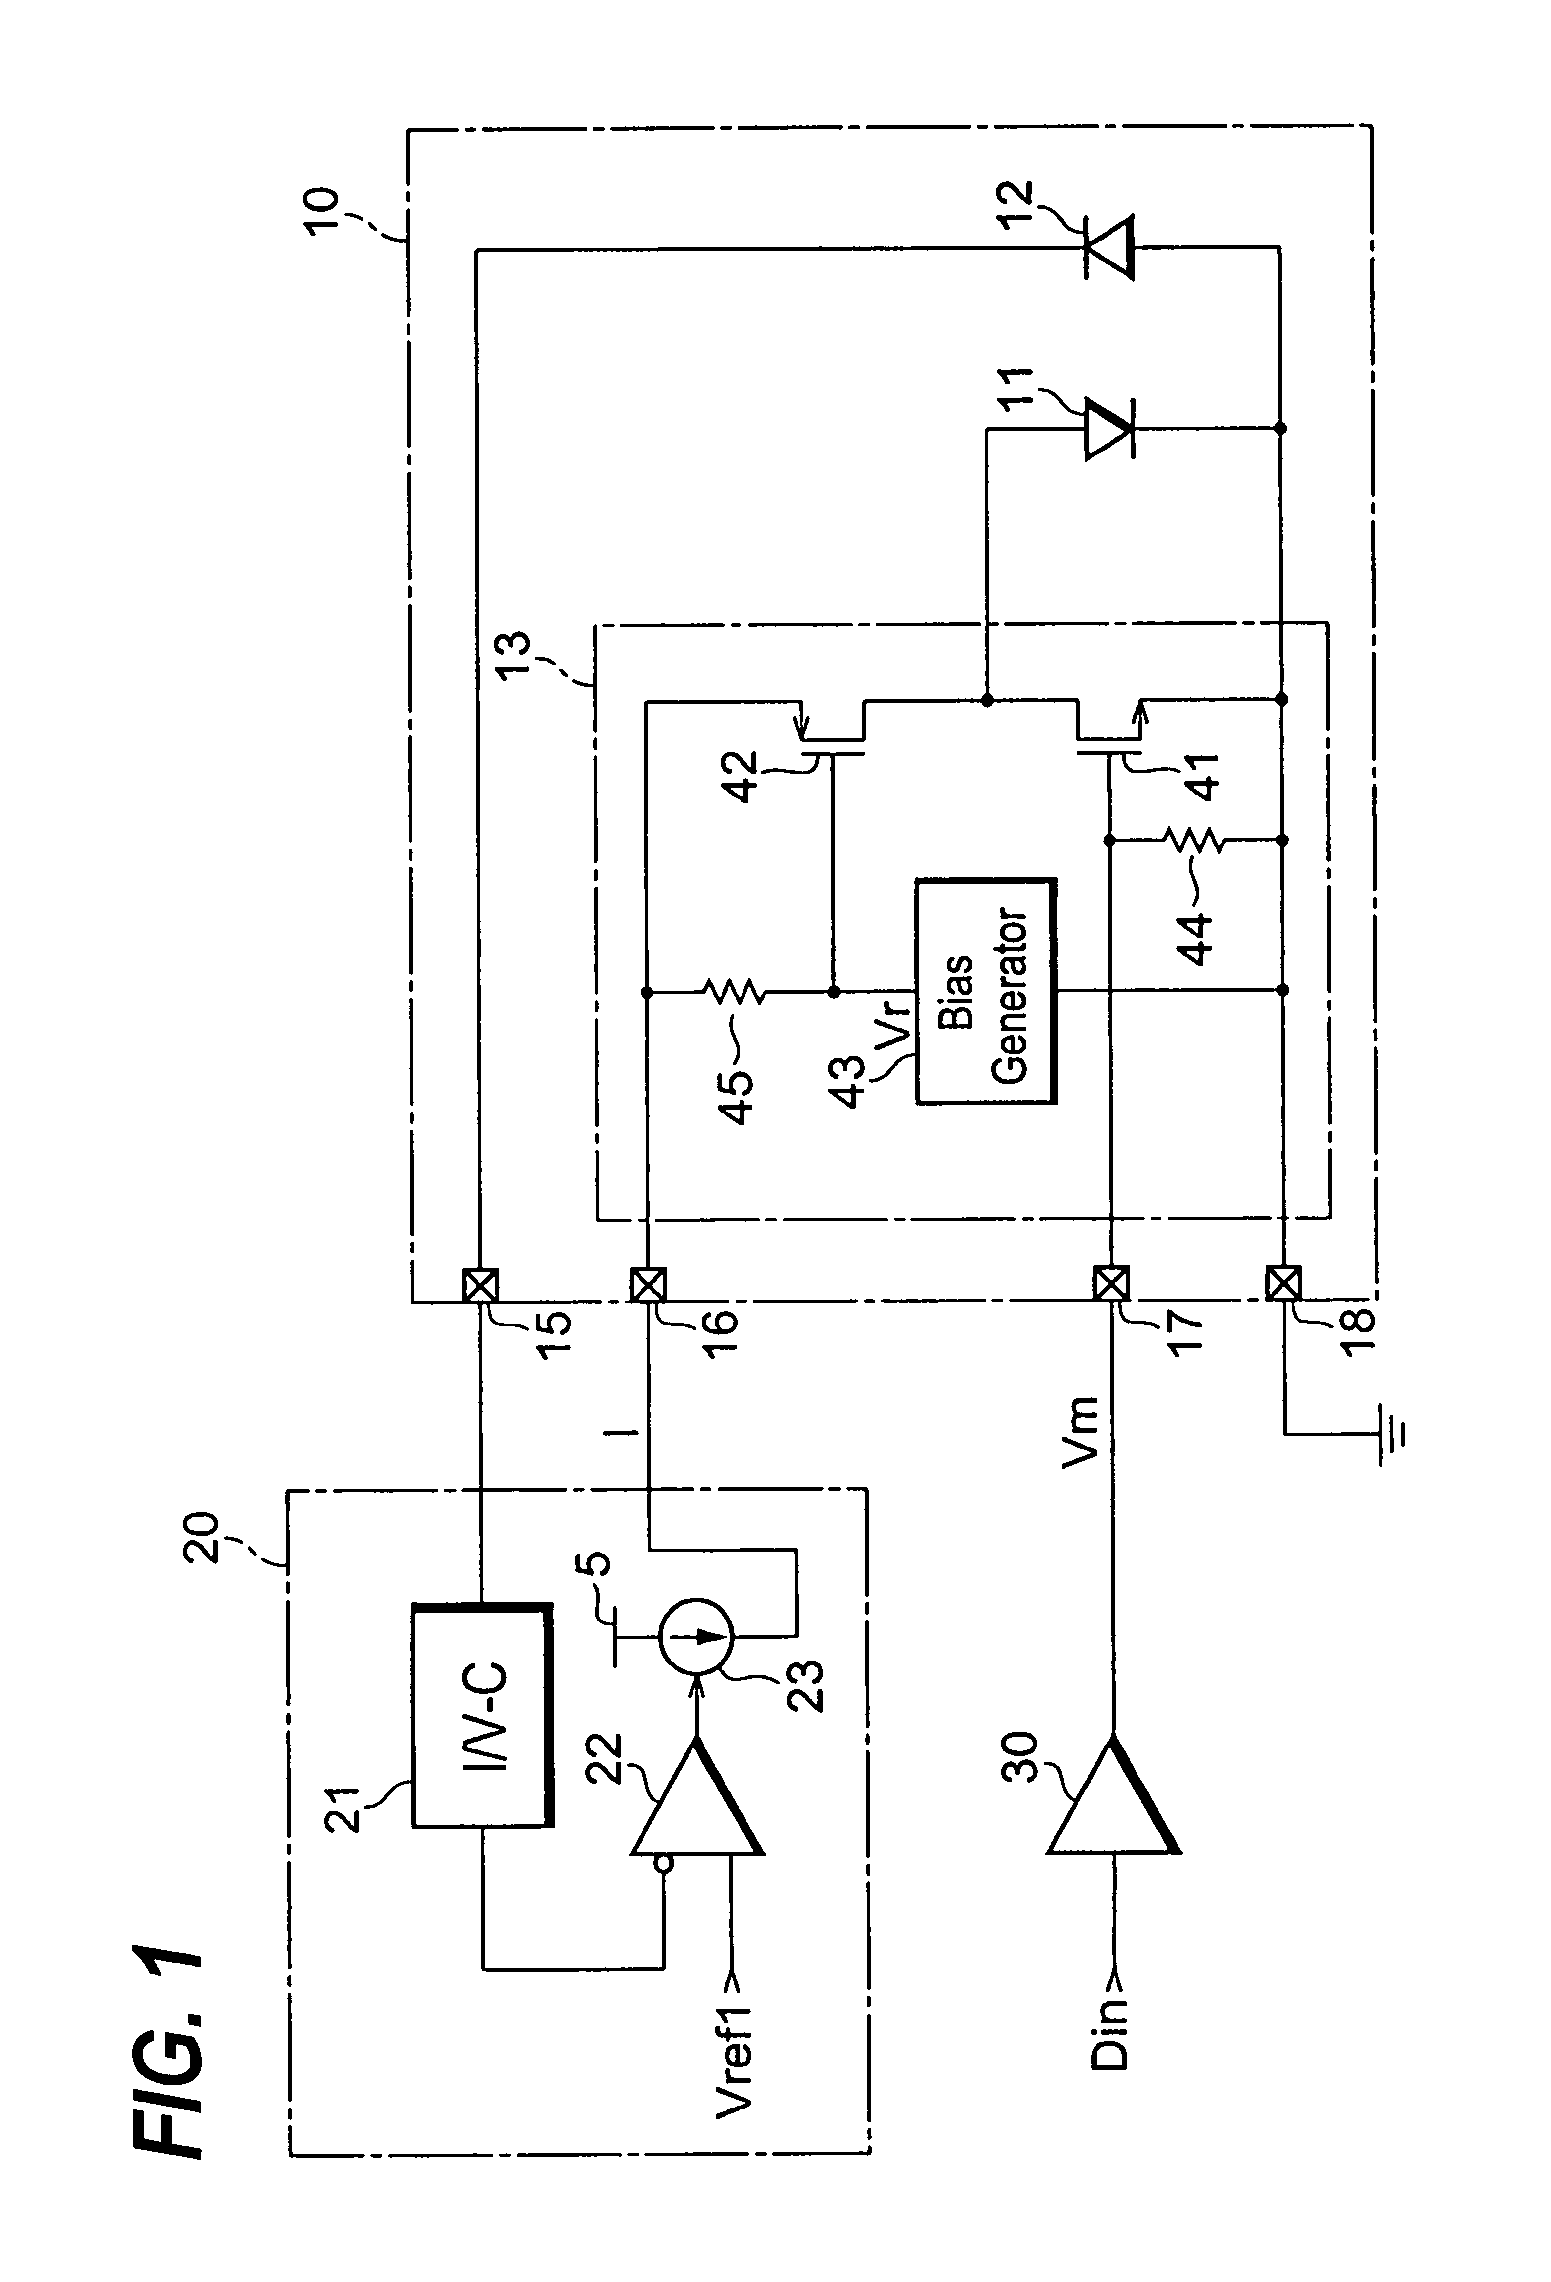 Optical transmitter with a shunt driving configuration and a load transistor operated in common gate mode